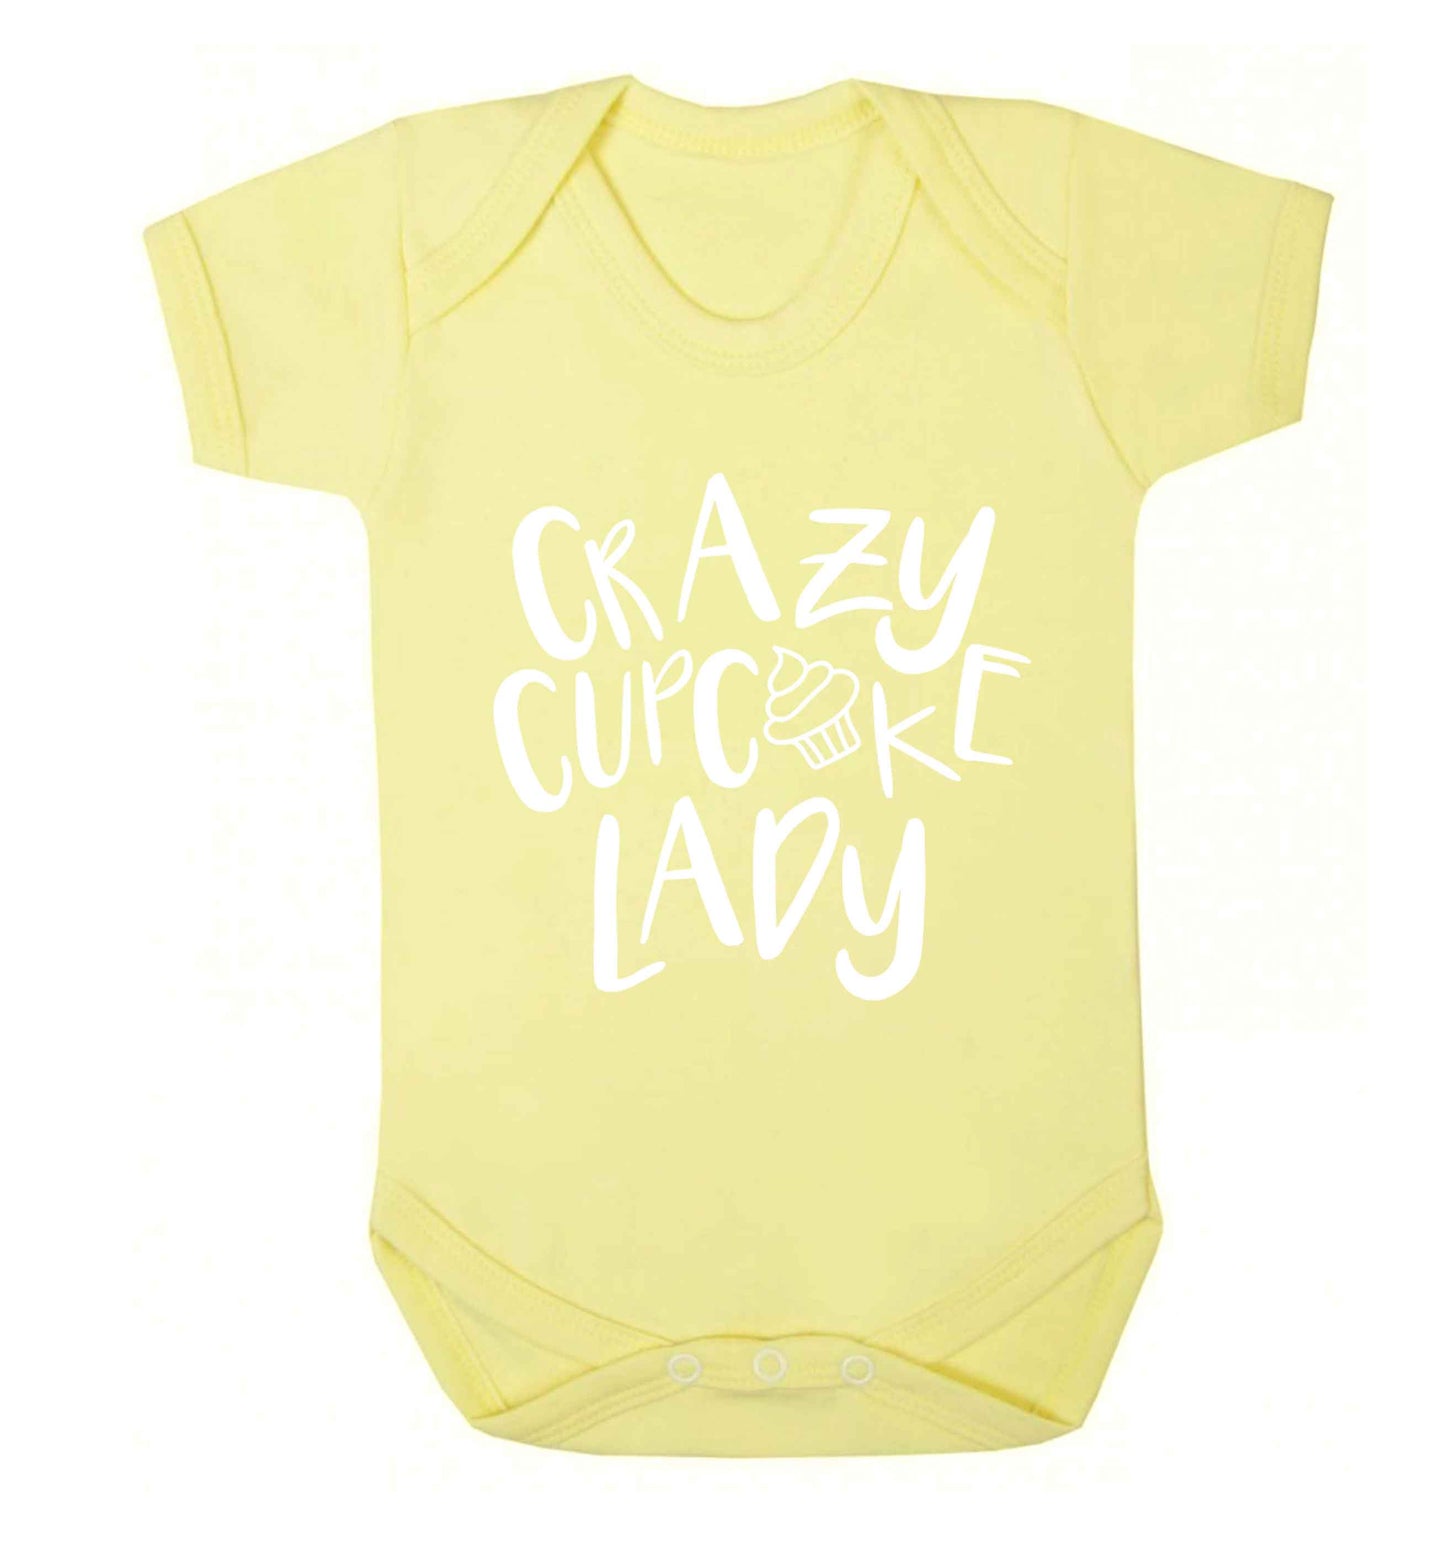 Crazy cupcake lady Baby Vest pale yellow 18-24 months